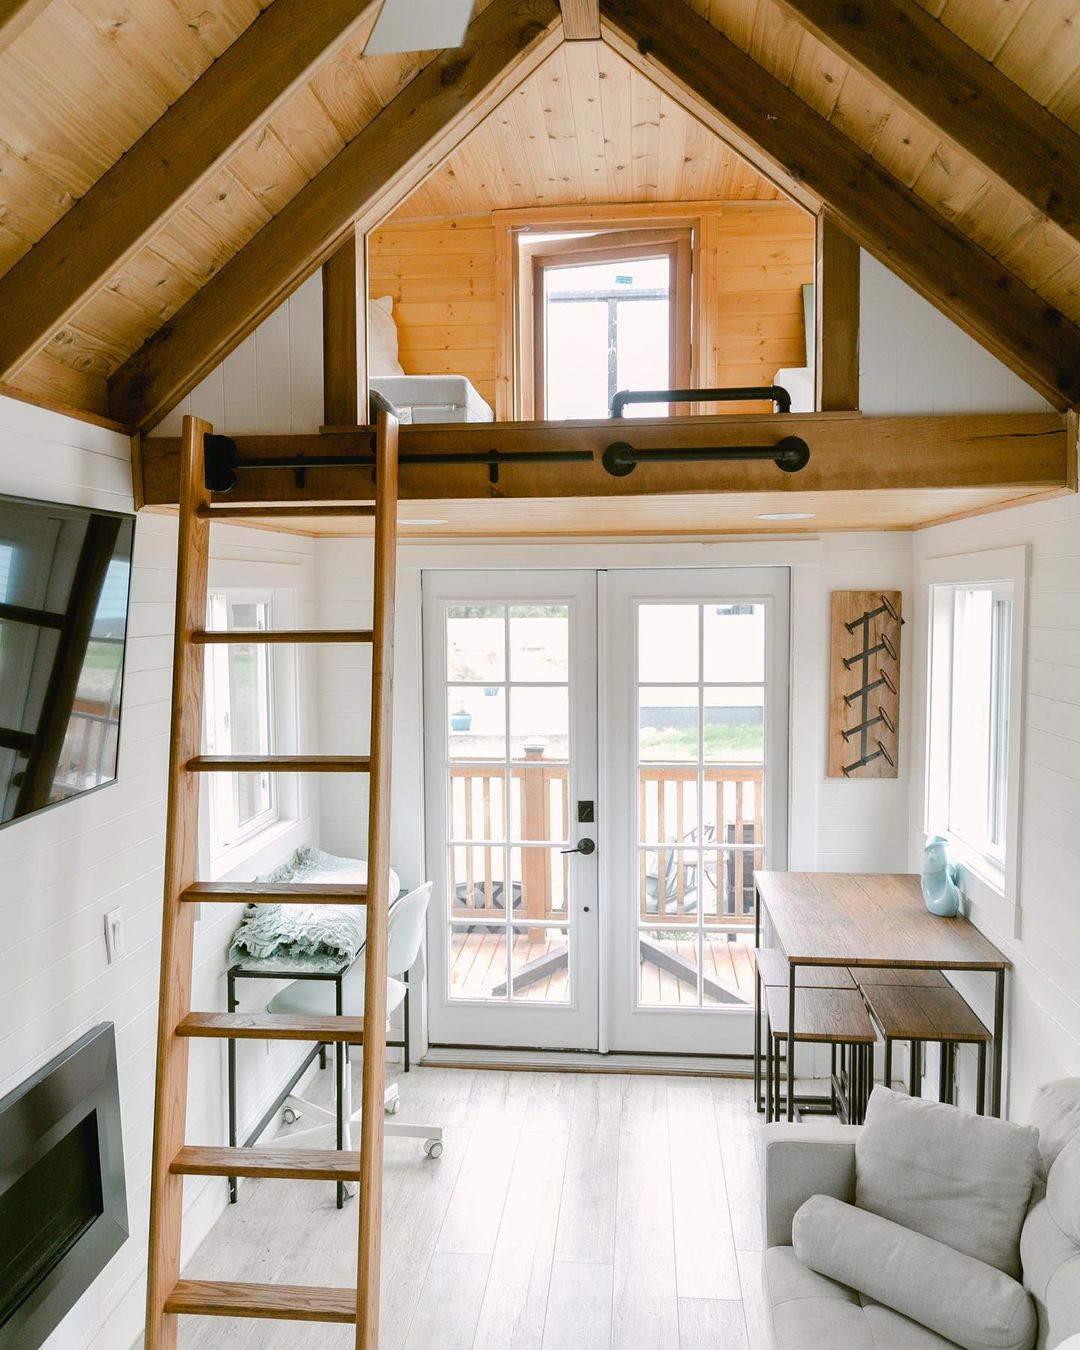 Small Living Space with Loft Space Above Front Door. Photo by Instagram user @jethospitality